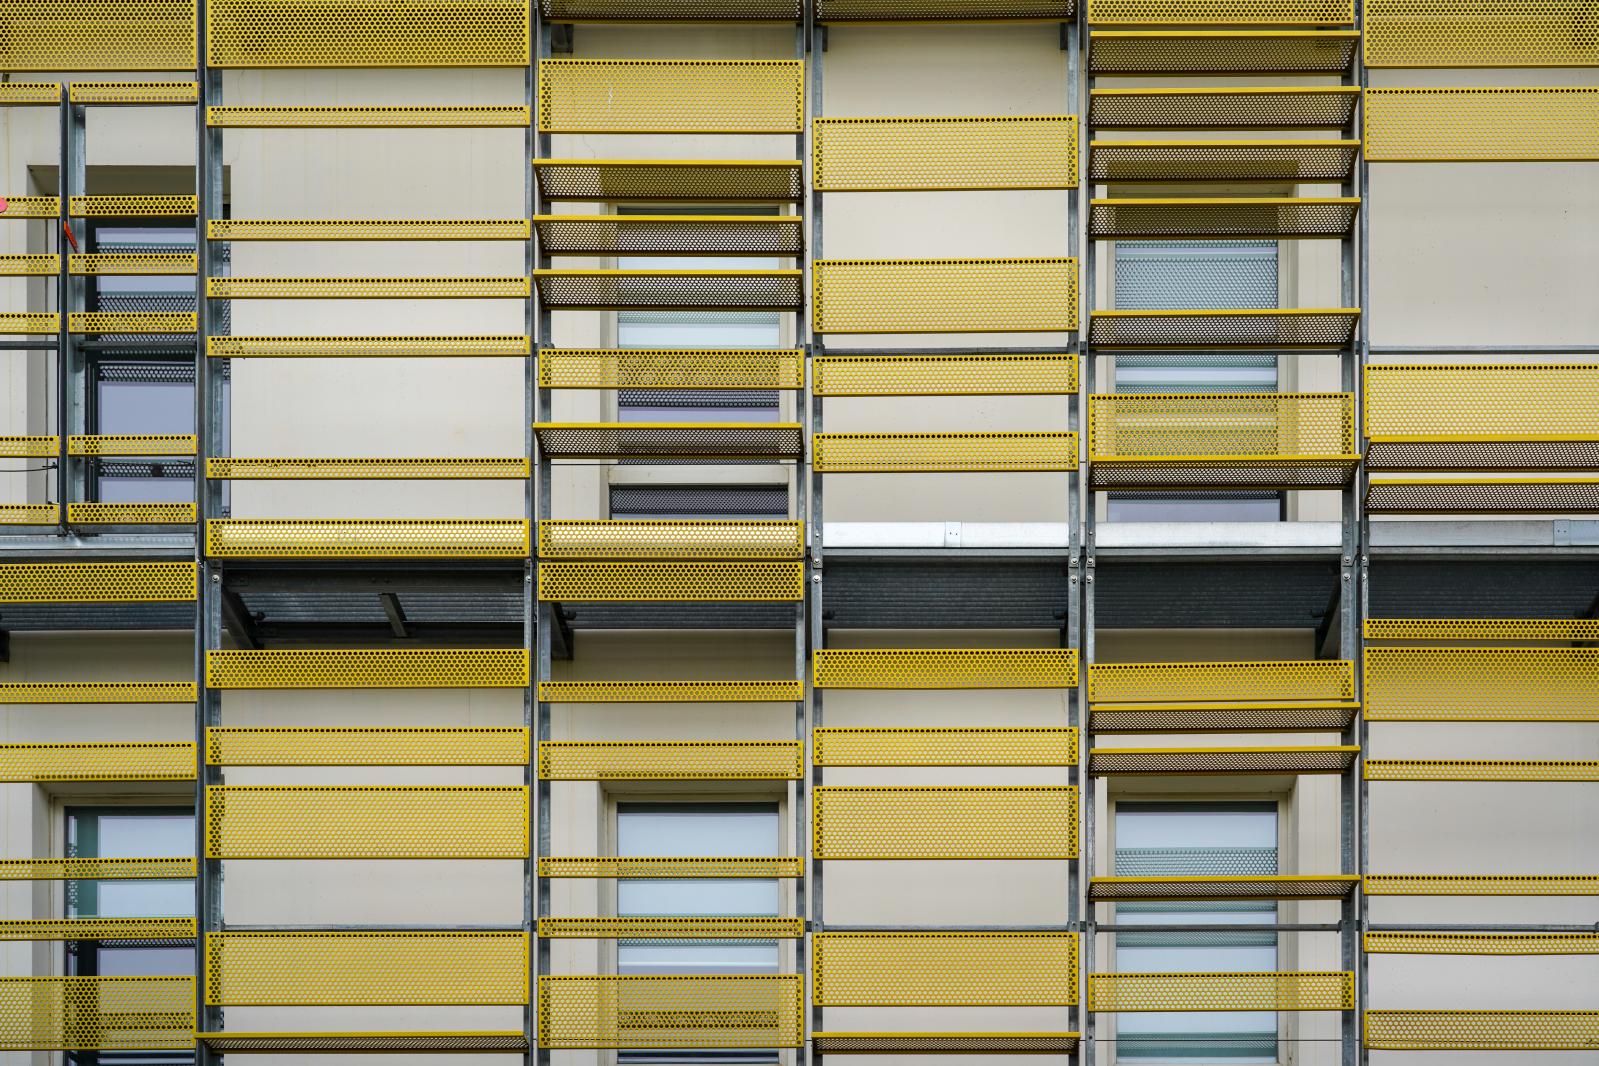 Image from New Photographs -  Grenoble, France  # 4299 4/2024 Urban Beehive: Dynamic...